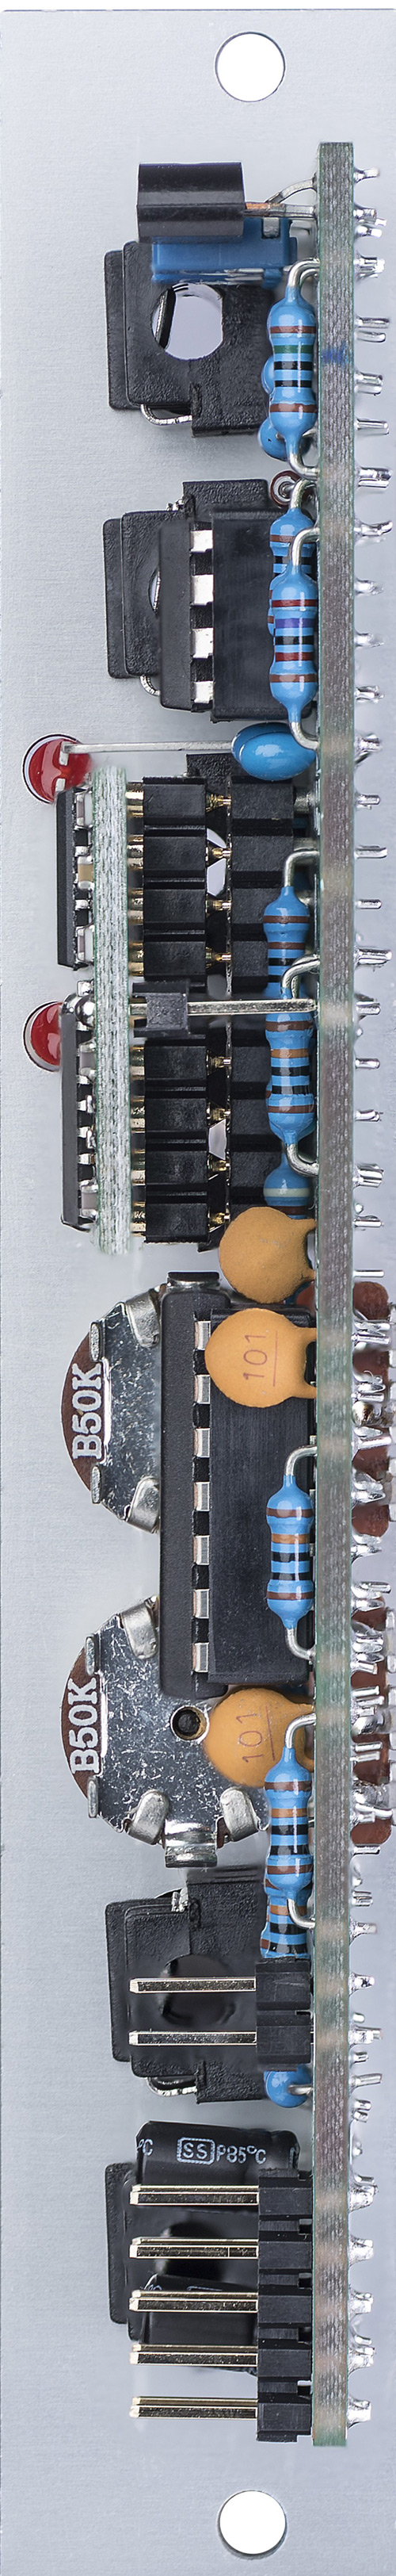 Rear View: A-184-2 Voltage Controlled Crossfader / Triangle-to-Sine Waveshaper